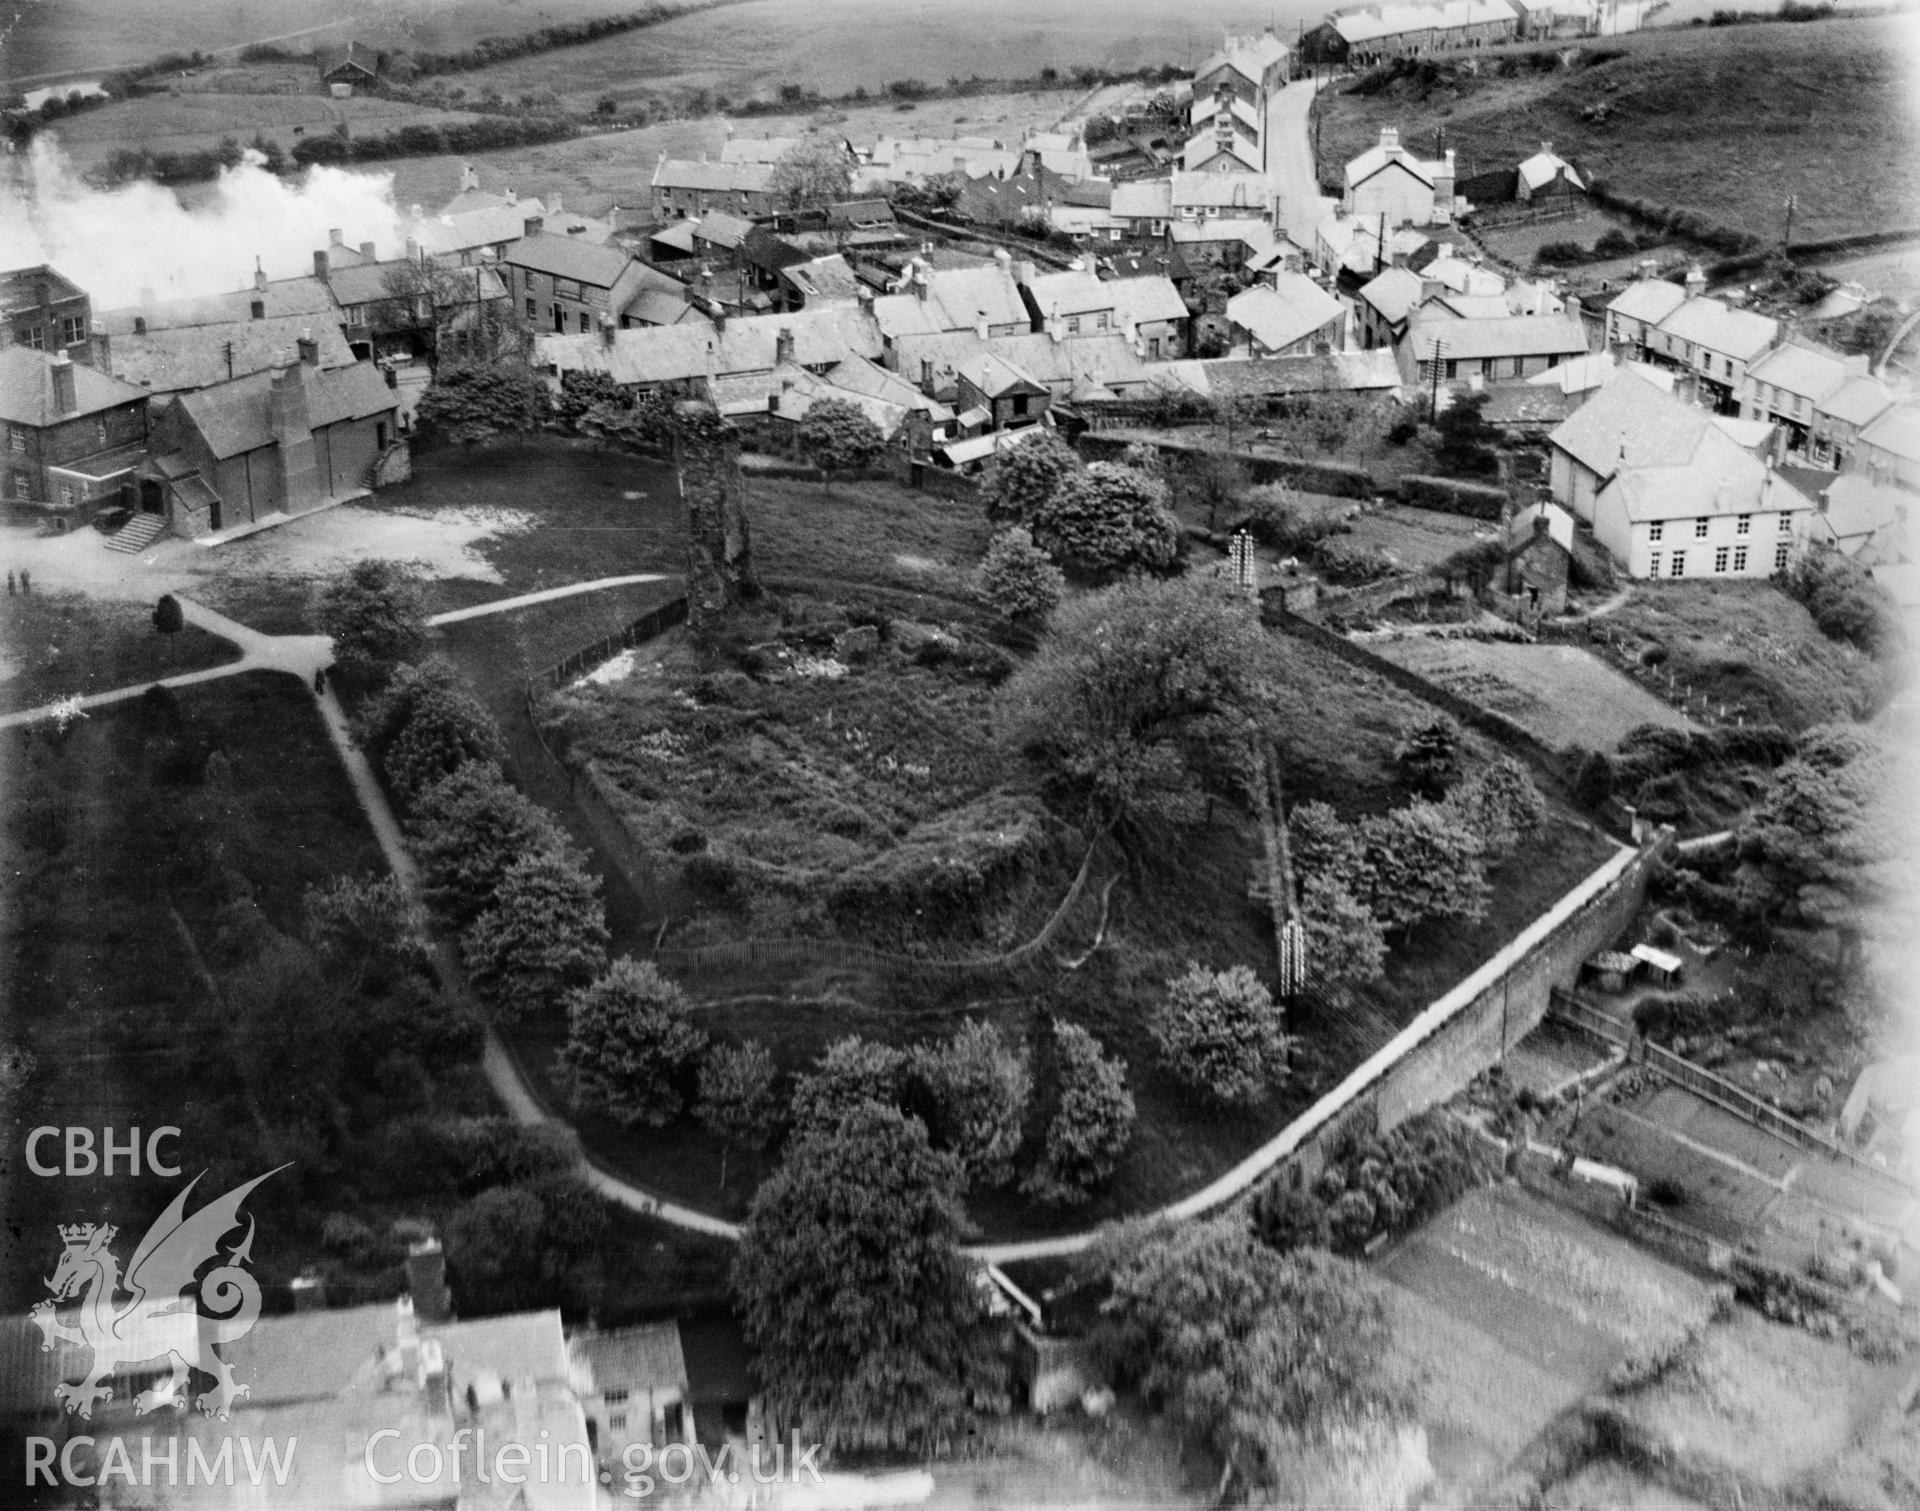 View of Llantrisant showing castle, oblique aerial view. 5?x4? black and white glass plate negative.